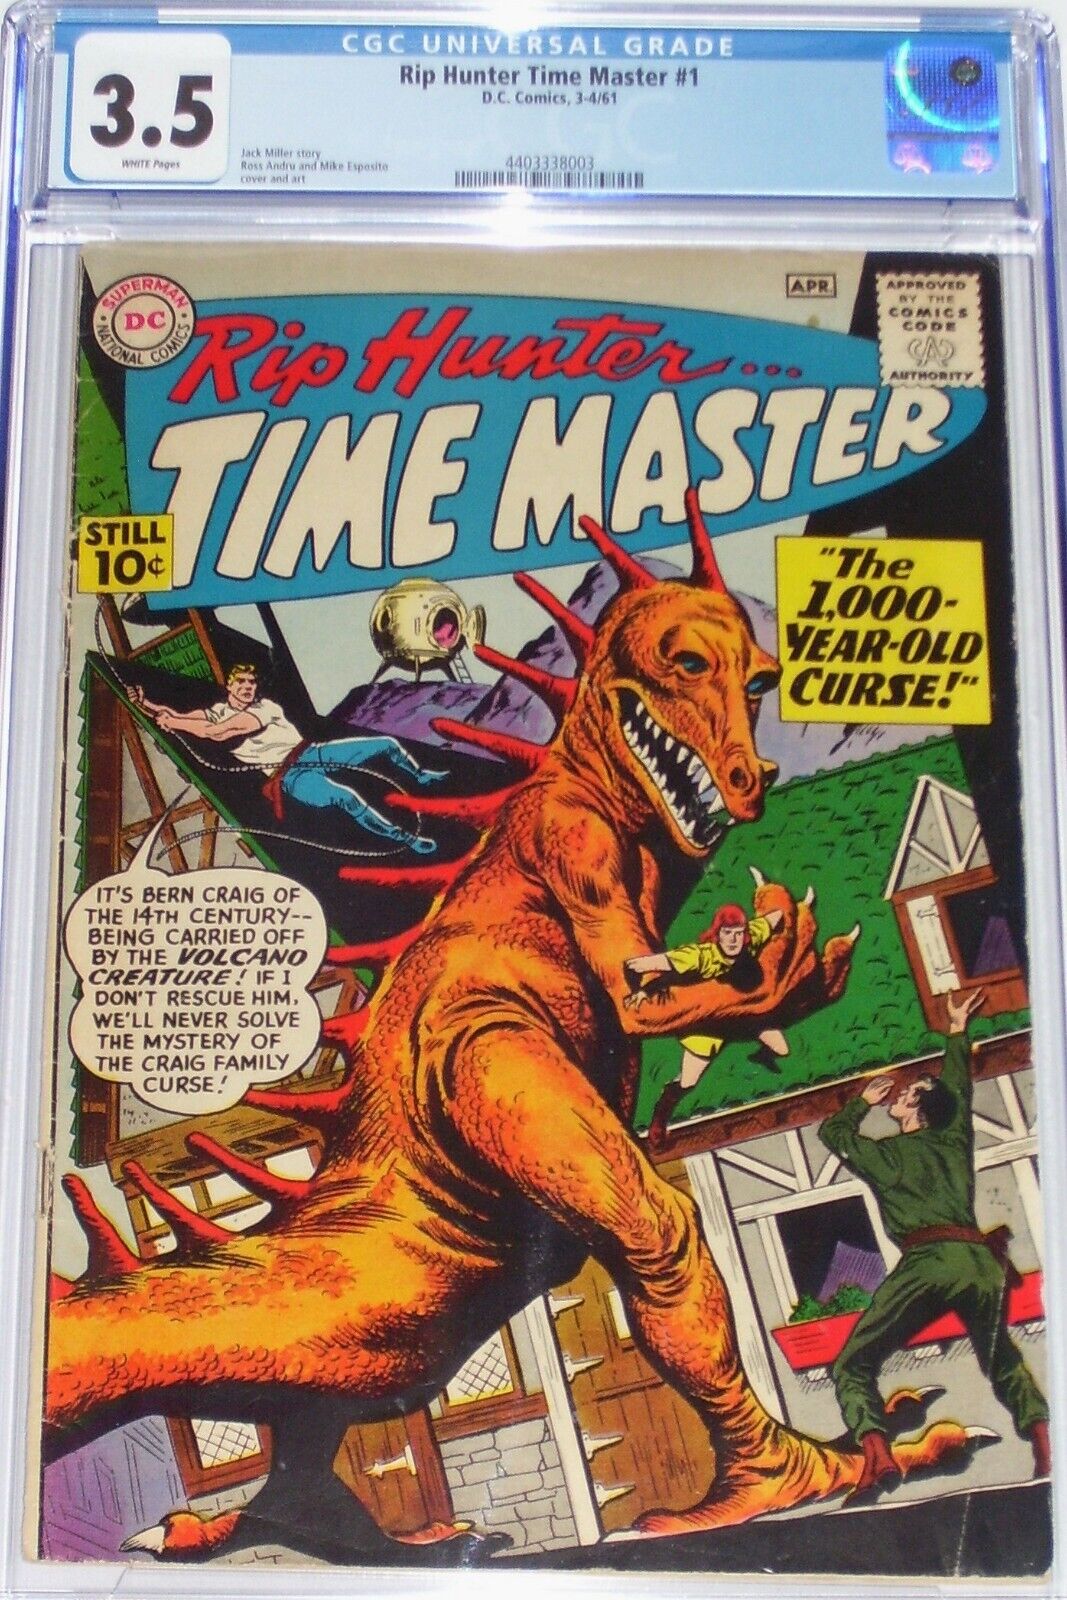 Rip Hunter Time Master #1 CGC 3.5 from April 1961